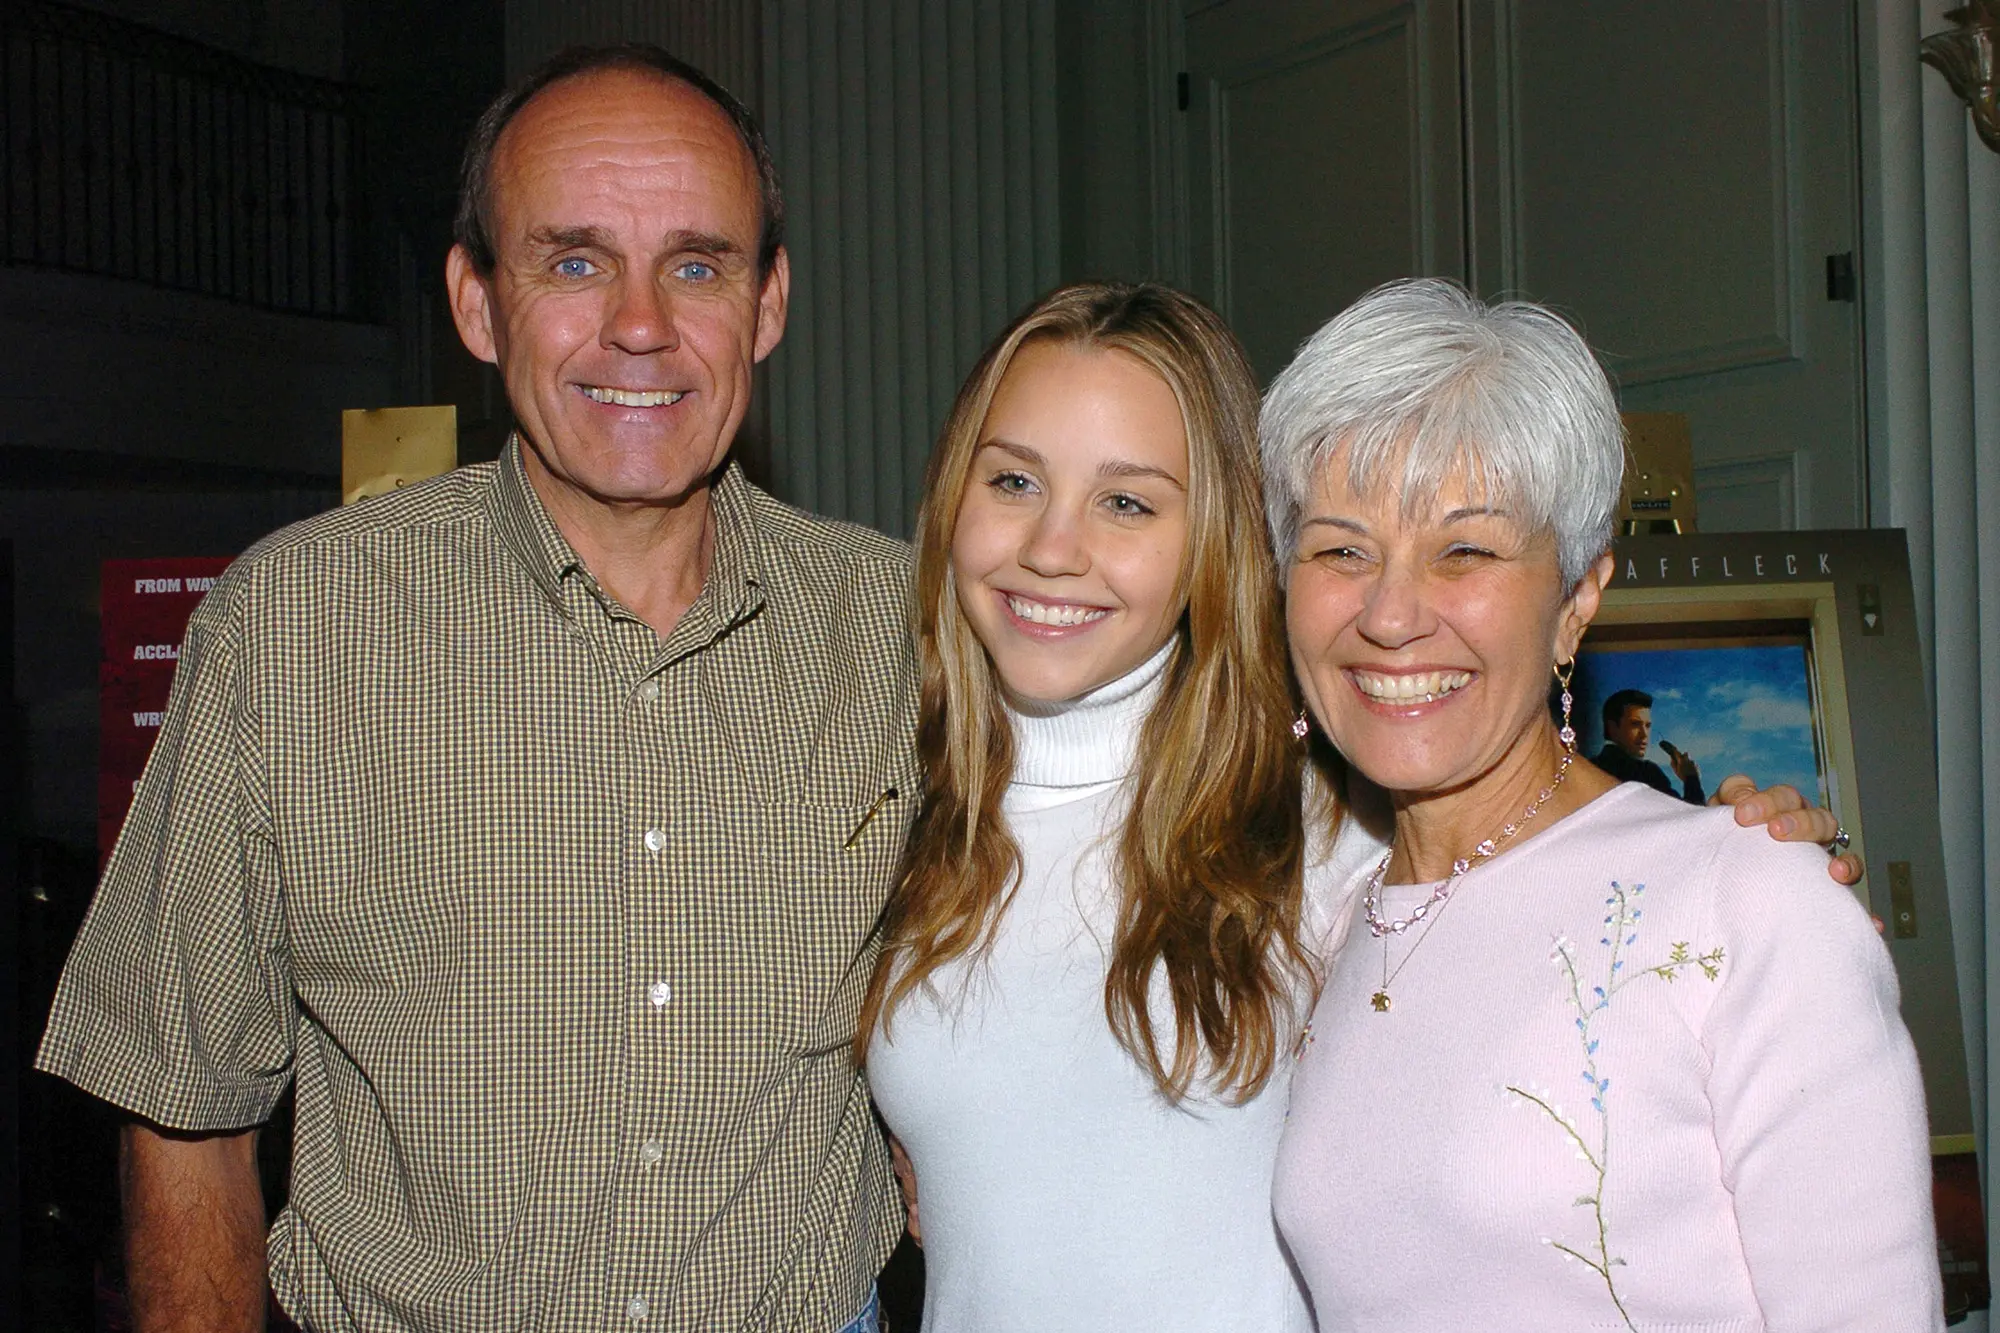 Amanda Bynes with her parents